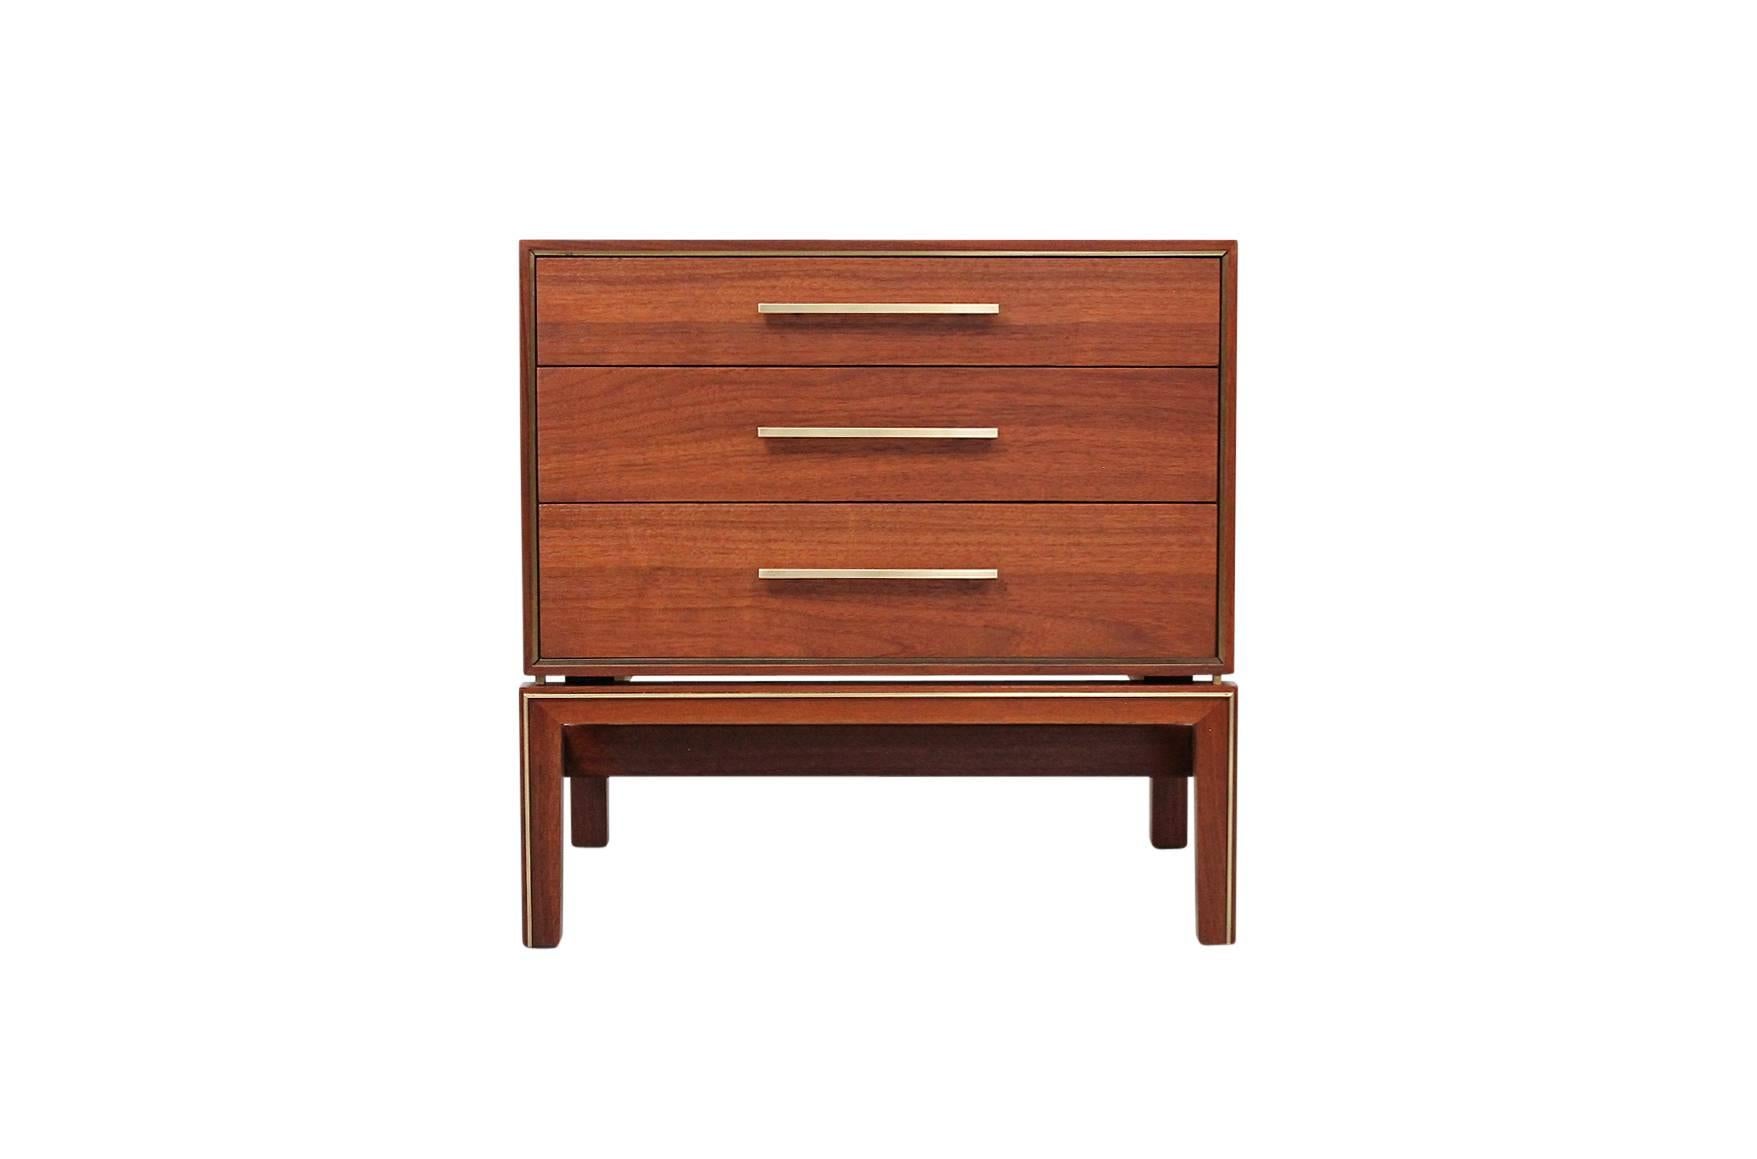 Pair of nightstands or small chests by Johnson Furniture. Attractive and useful pieces in walnut and brass.